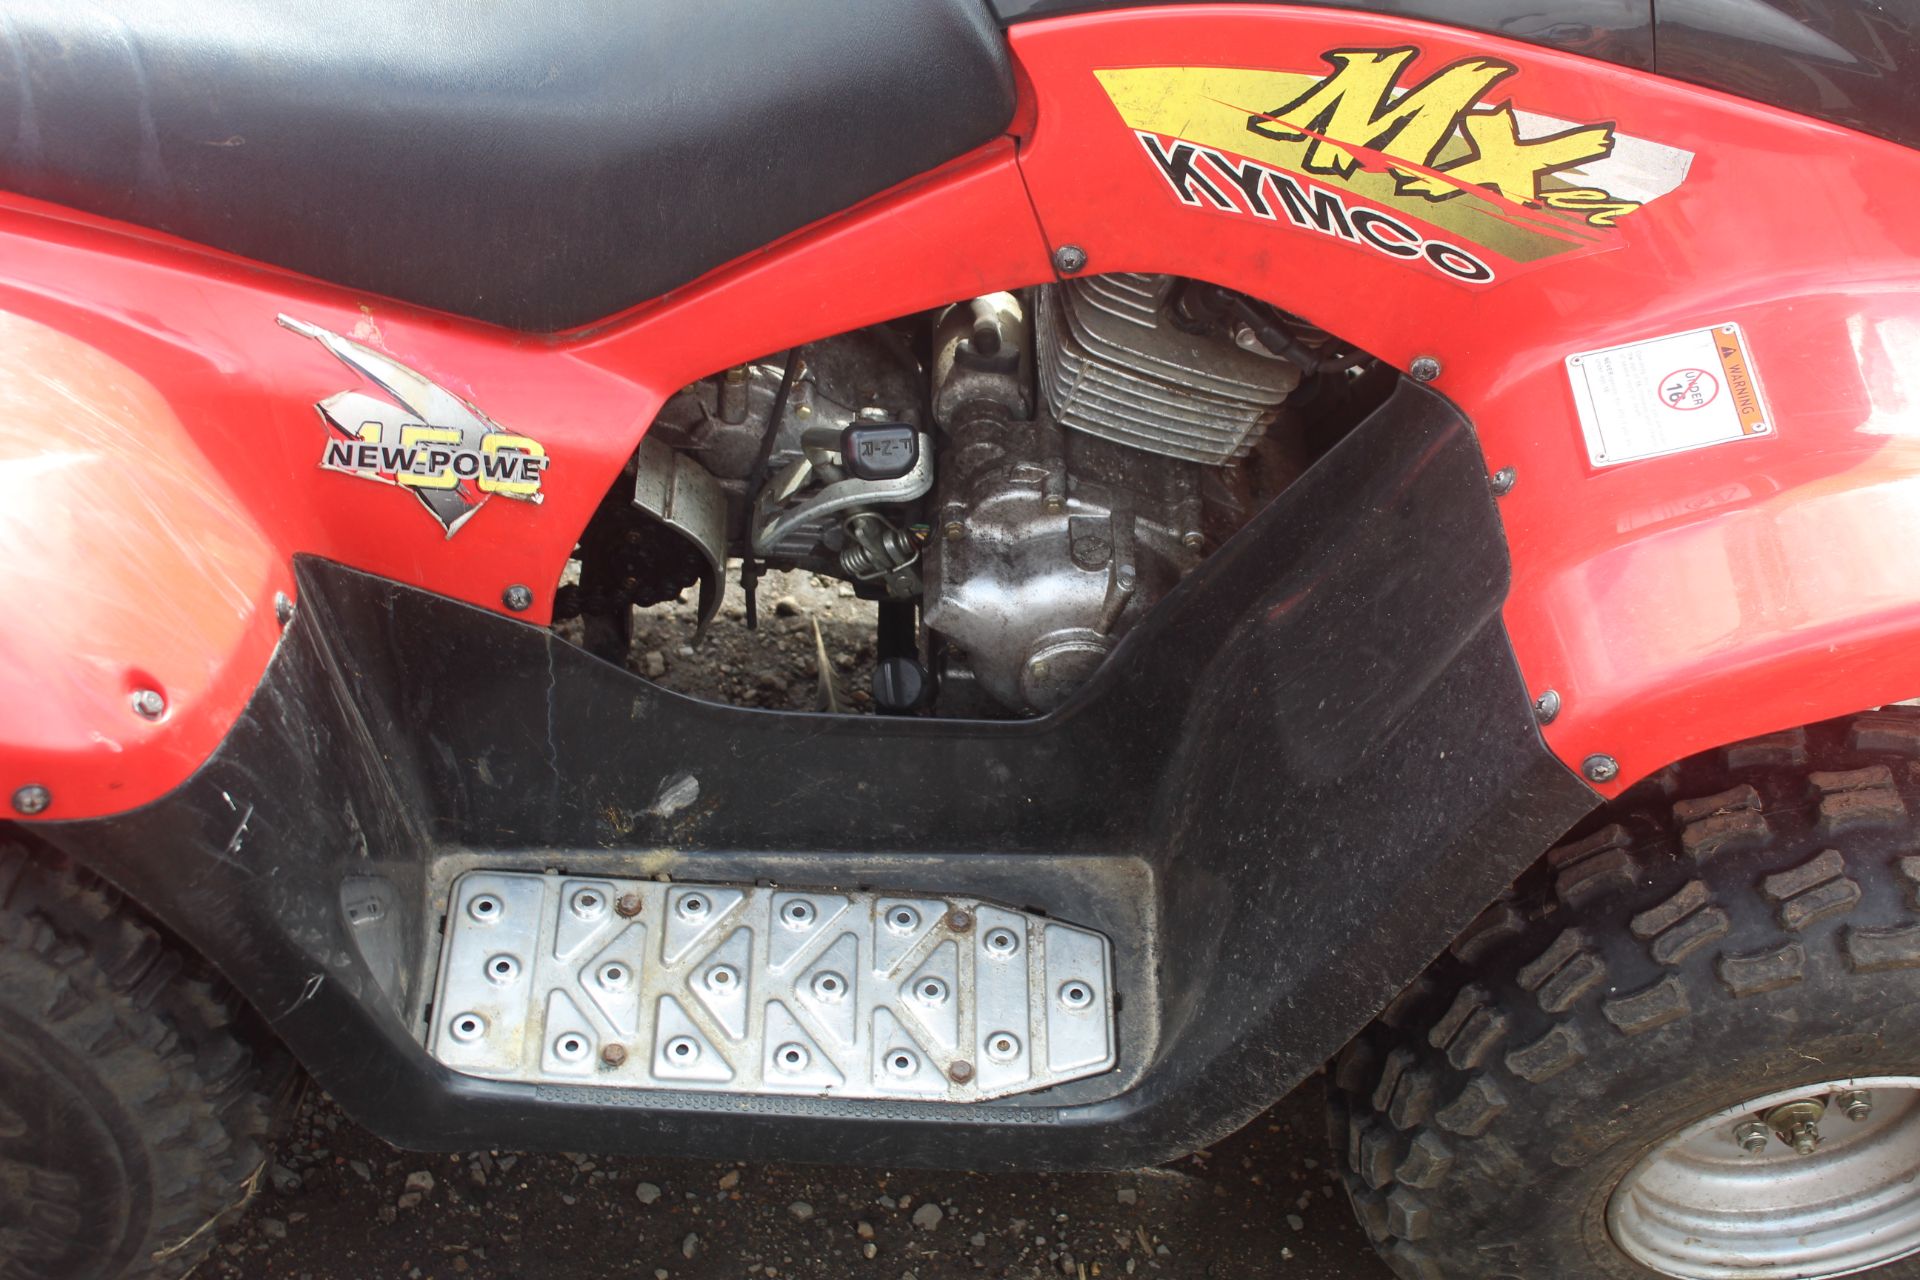 Kymco MX'er 150cc off road ATV. 2004. owned from new. Key, Manual held. - Image 11 of 18